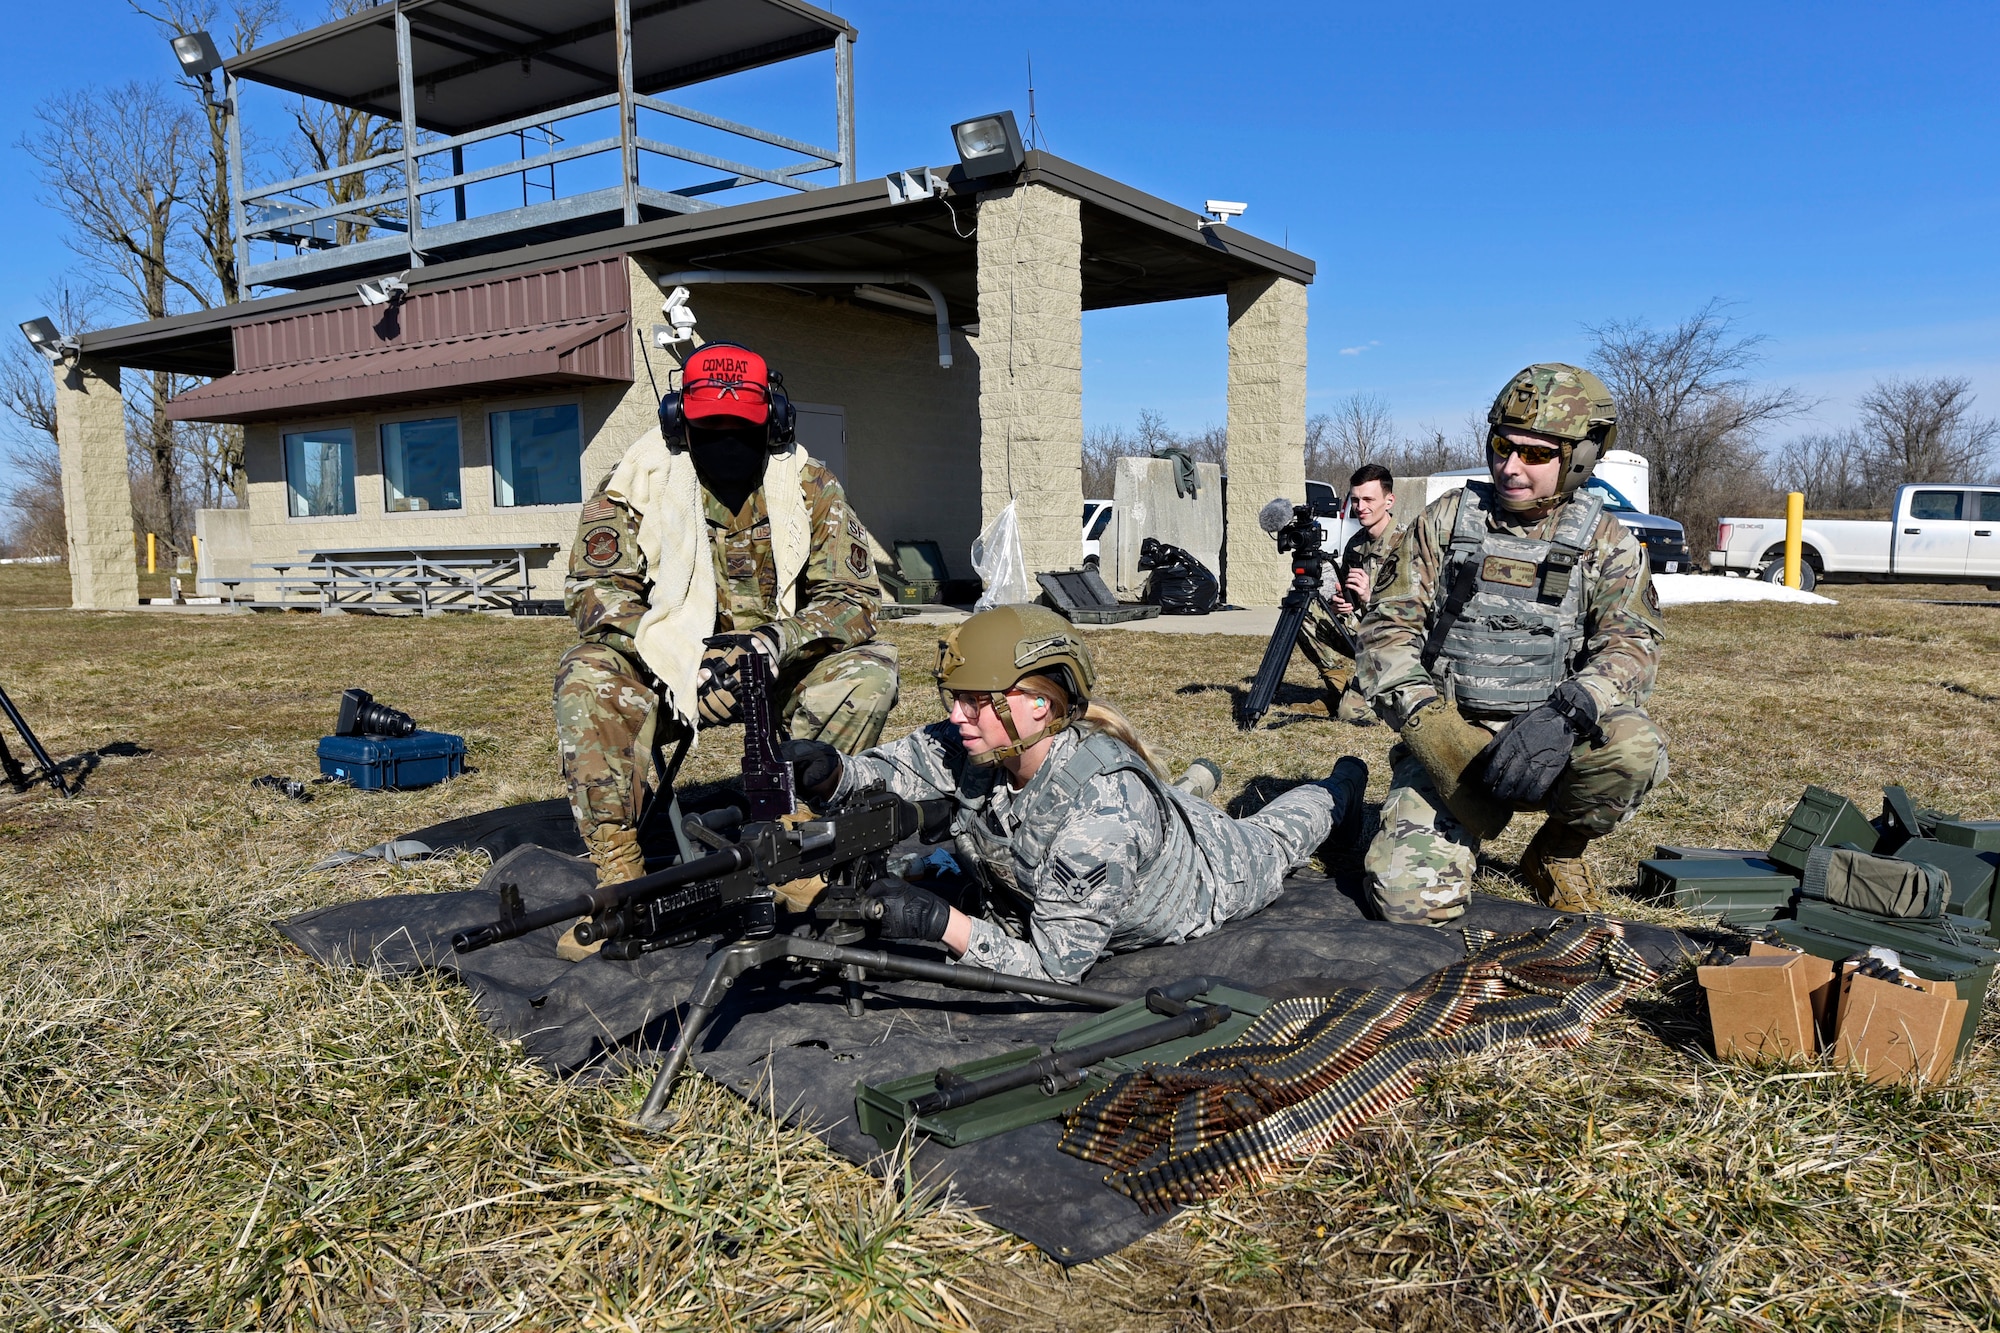 Air Force combat arms instructors with the 88th Security Forces Squadron from Wright-Patterson Air Force Base, Ohio, assemble an M240B machine gun on a shooting range at Camp Atterbury in Edinburgh, Indiana, on Feb. 25, 2021. The combat arms instructors, travel to Camp Atterbury multiple times each year for readiness and qualification training with deployers on machine guns and grenade launchers. (U.S. Air Force photo by Ty Greenlees)